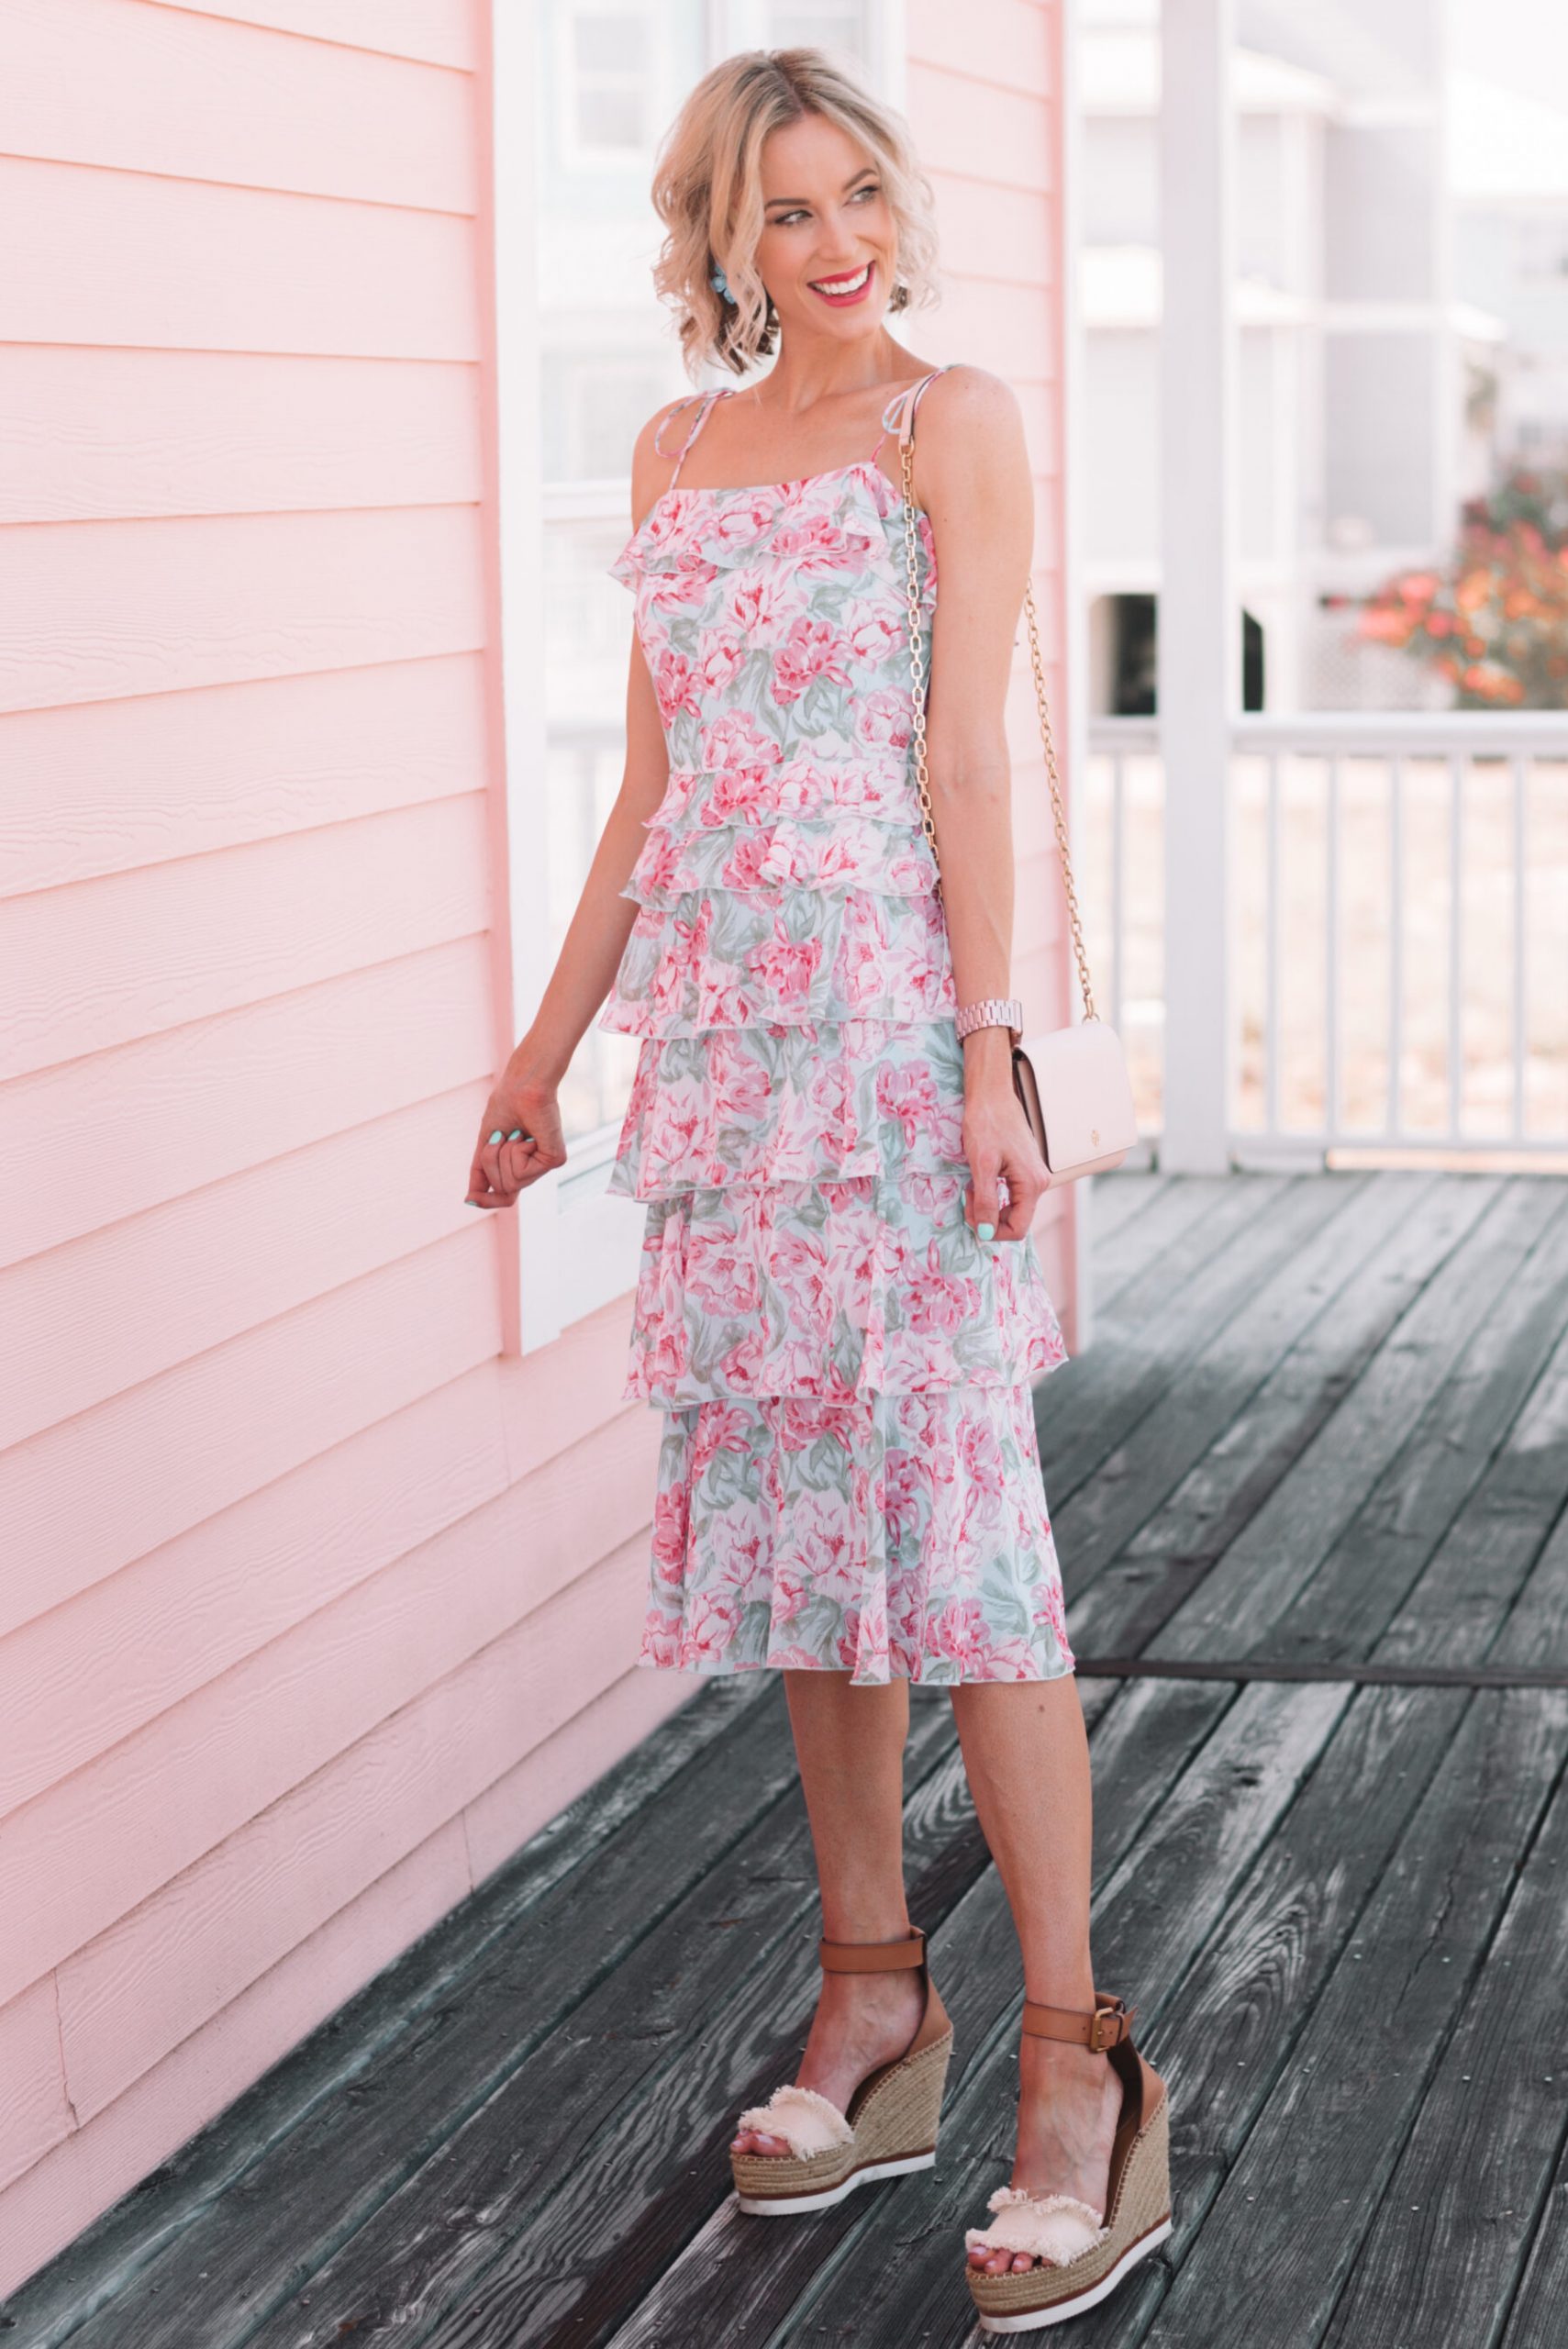 What to Wear to a Summer Wedding